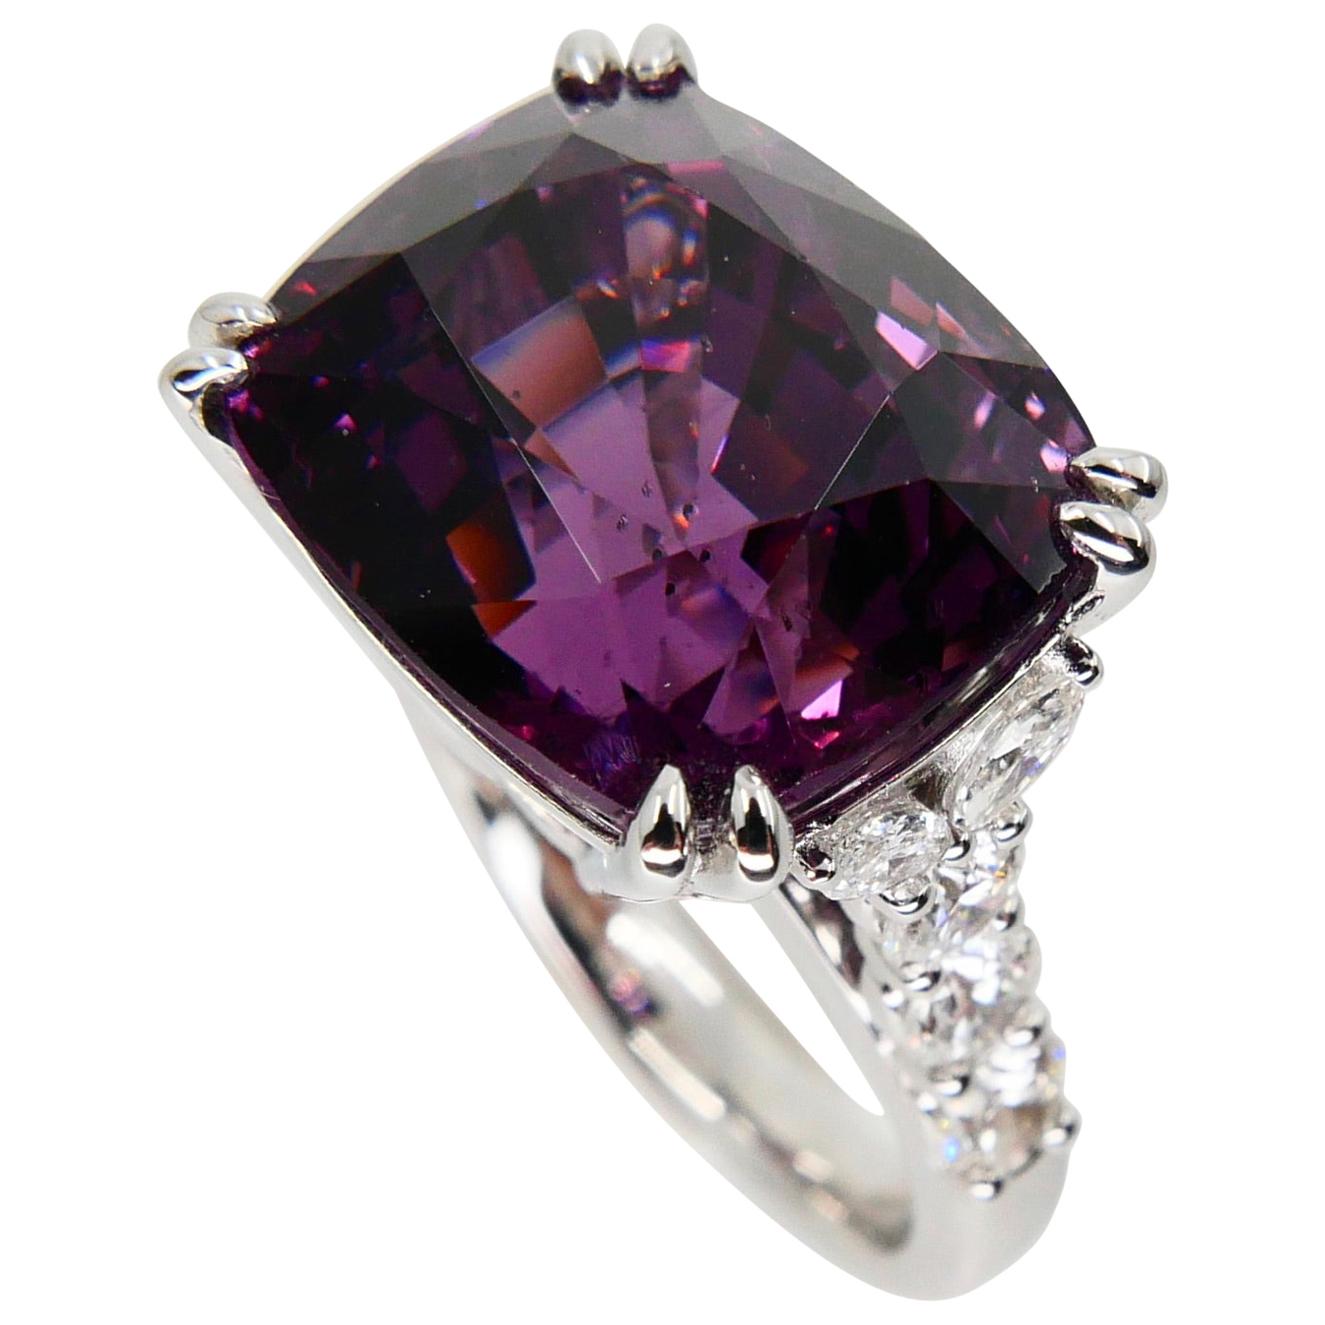 AIGS Certified 15.22 Carat Natural Spinel & Diamond Cocktail Ring, Burma No Heat